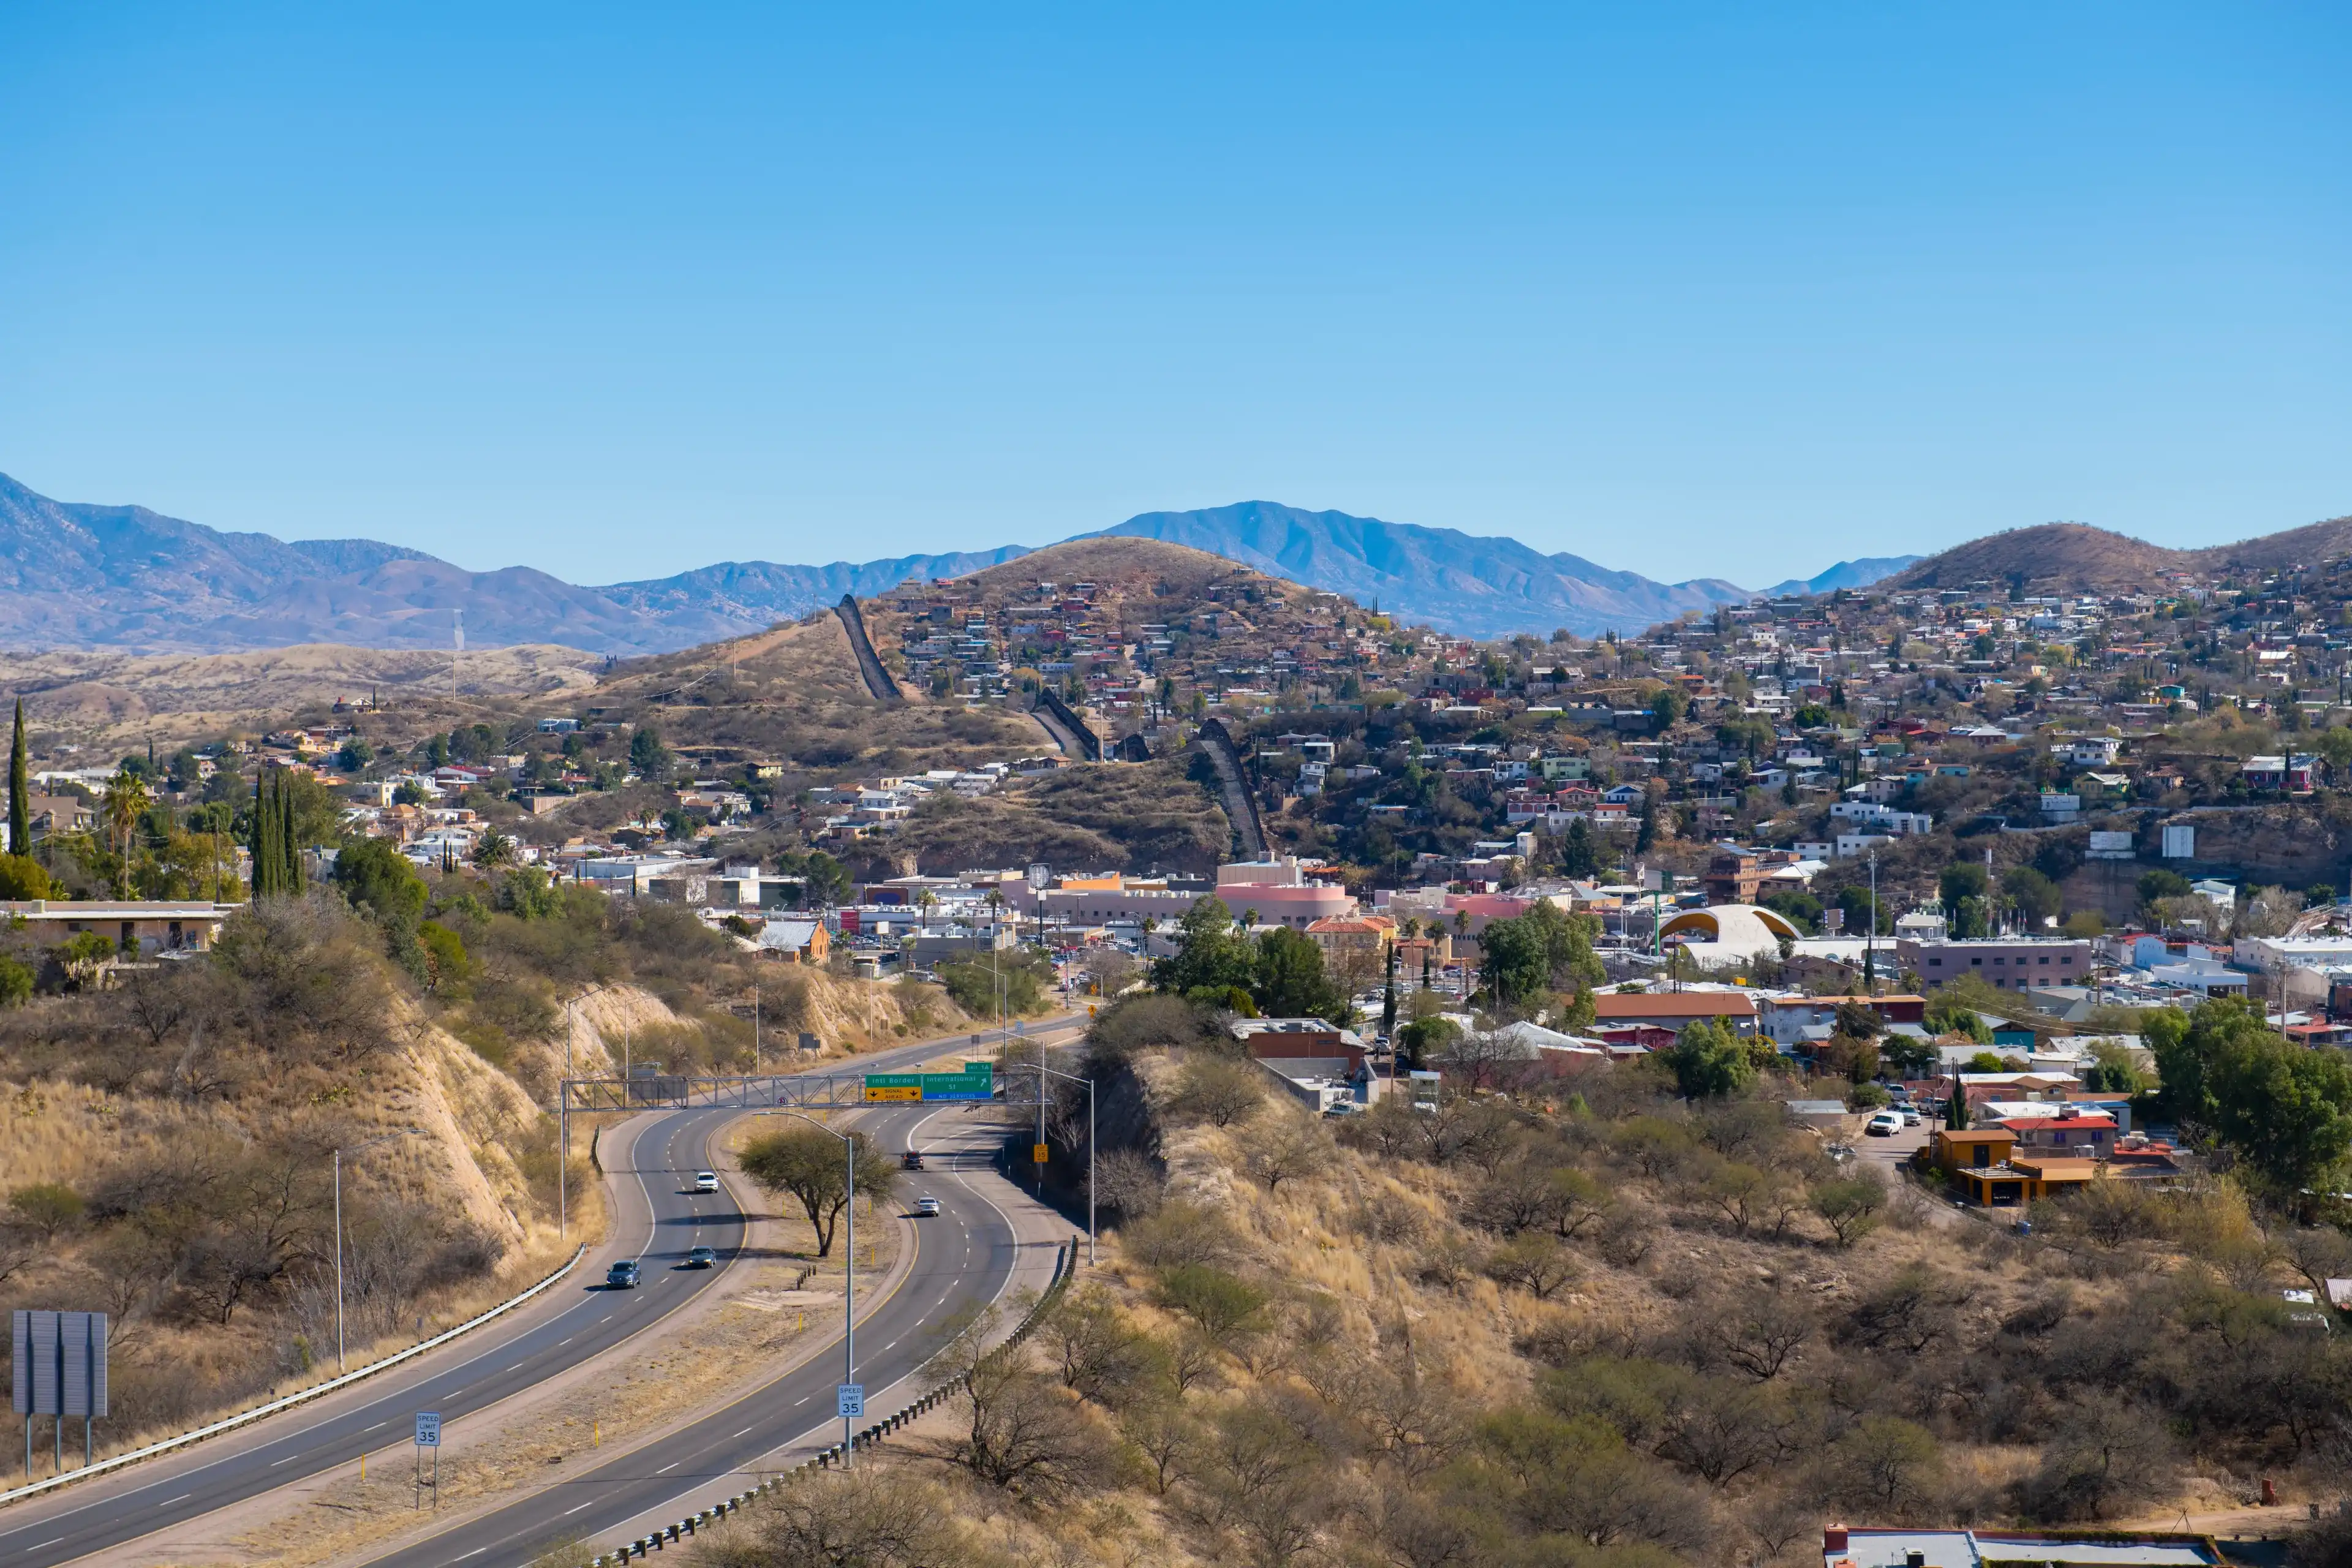 Best Nogales hotels. Cheap hotels in Nogales, Sonora, Mexico